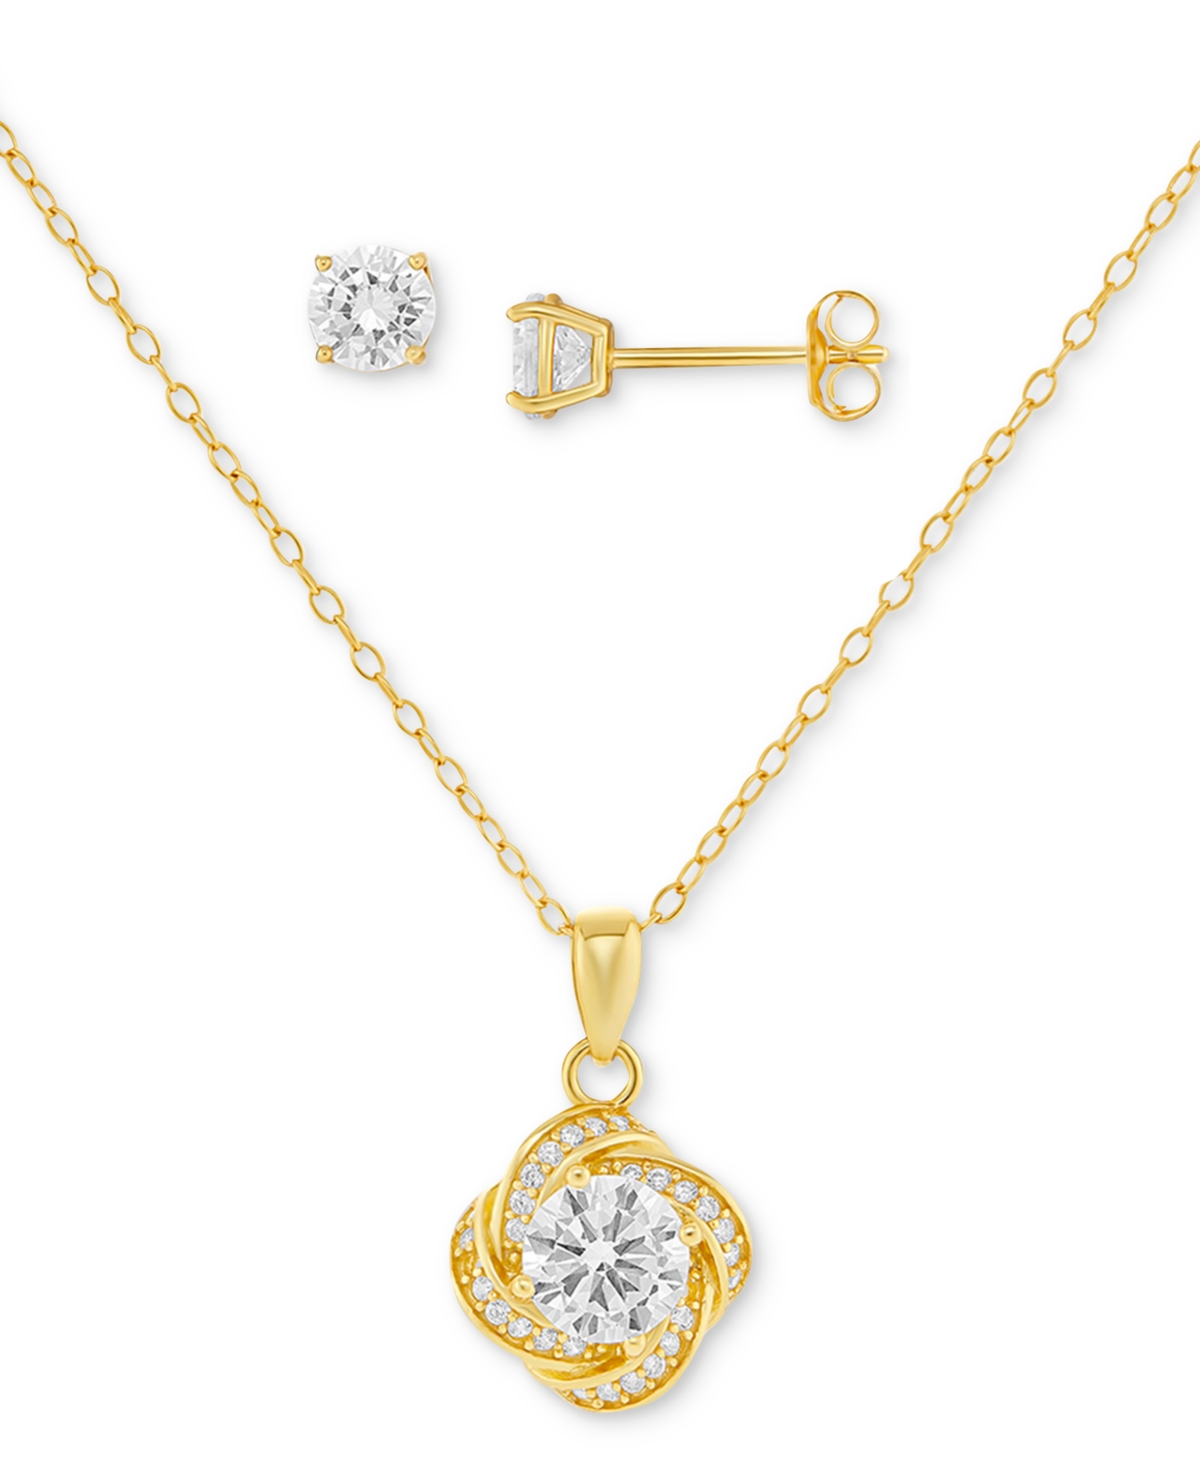 Giani Bernini 2-pc. Set Cubic Zirconia Swirl Pendant Necklace & Solitaire Stud Earrings In 18k Gold-plated Sterlin